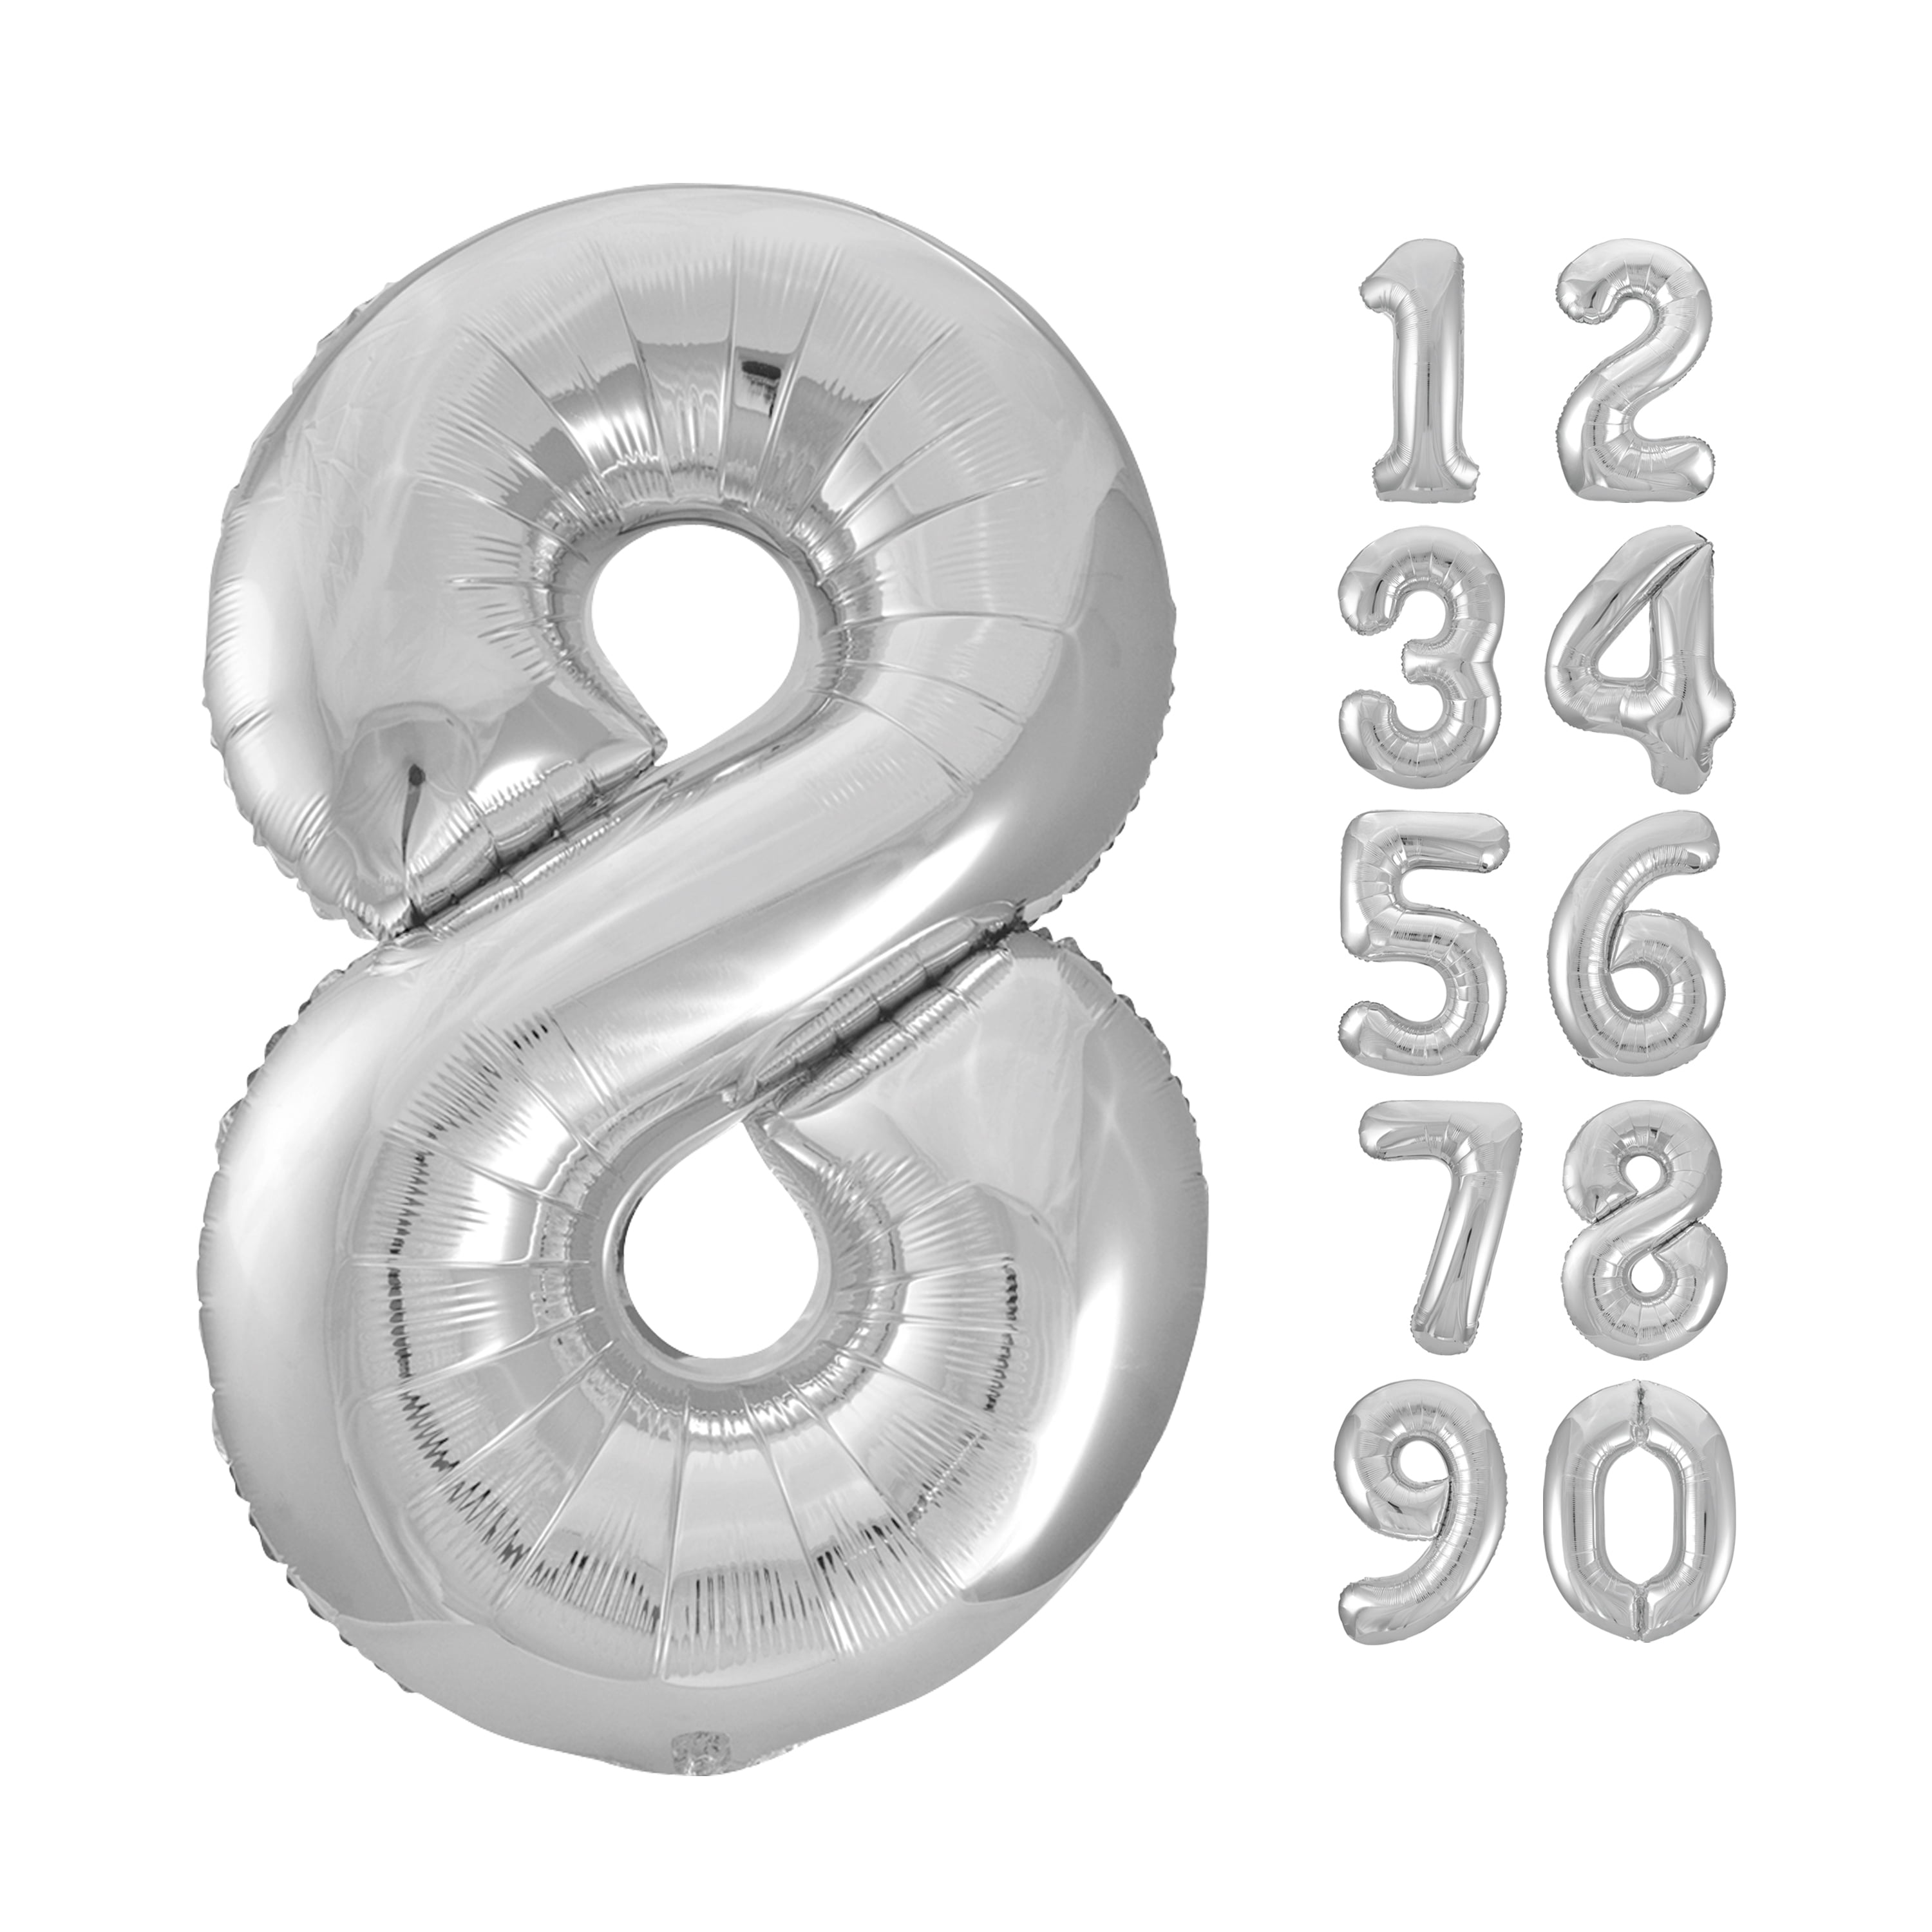 Foil Number Inflating Balloons Milestone 16 18 21 30 40 50 Banner Party Bunting